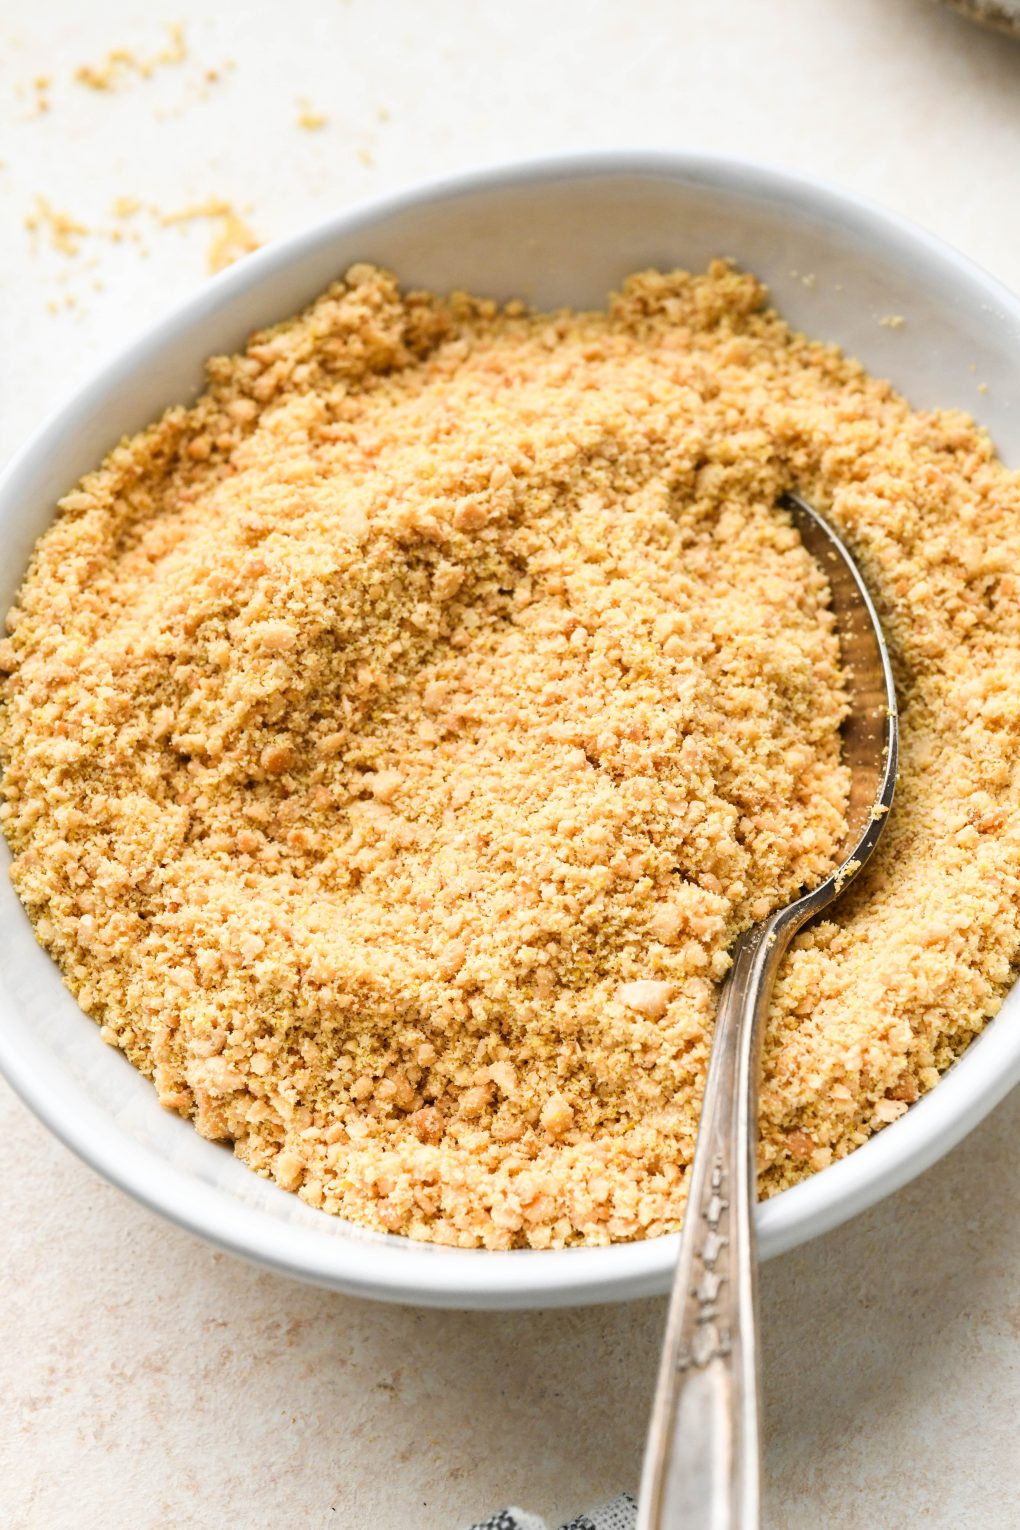 Vegan parmesan cheese in a small shallow white bowl, on a light cream colored background.